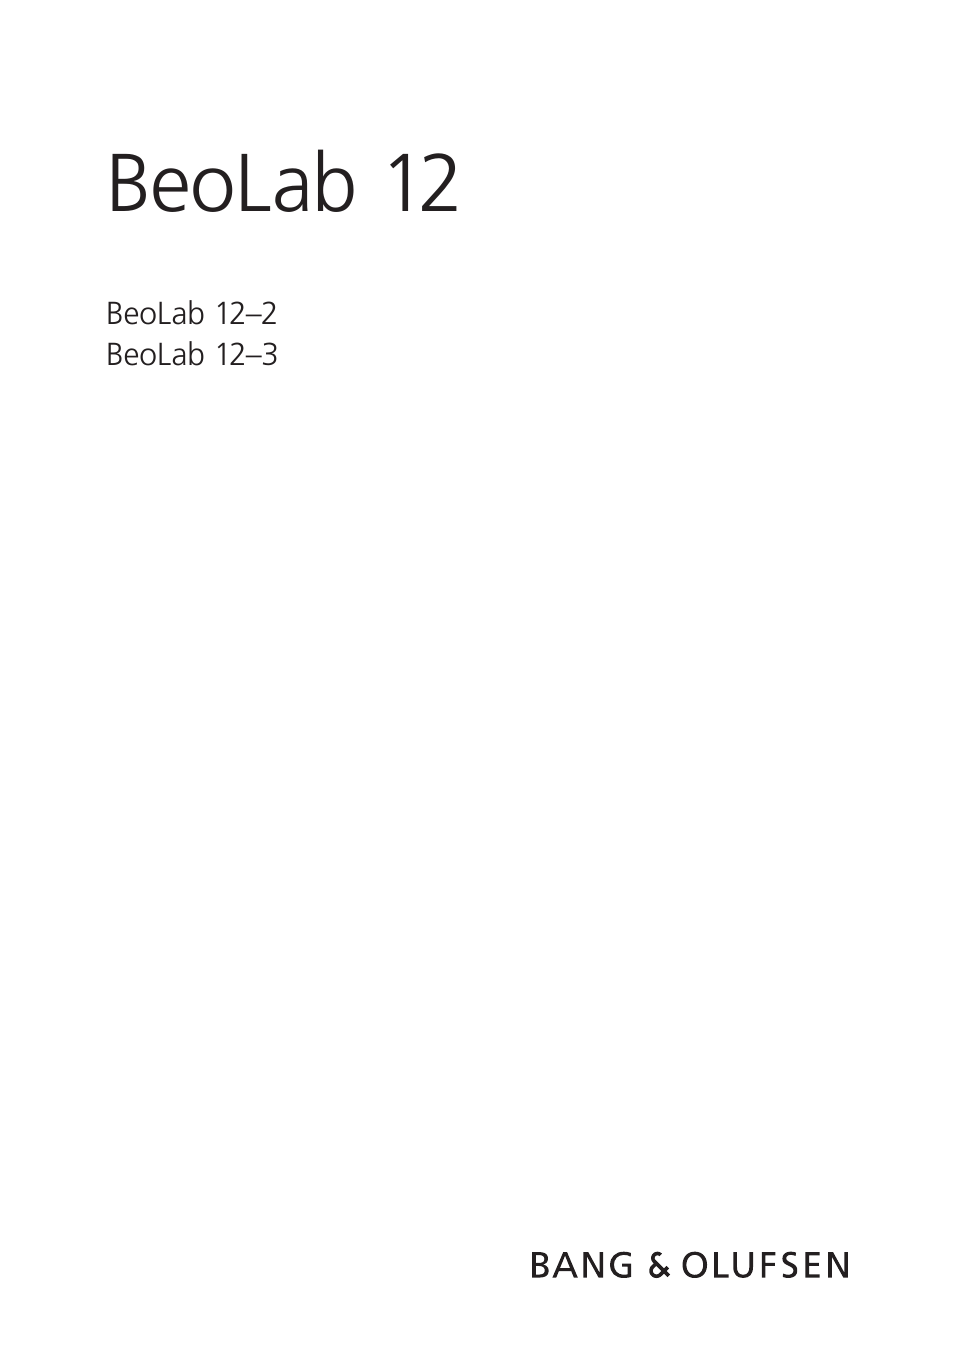 BeoLab 12-2 - User Guide